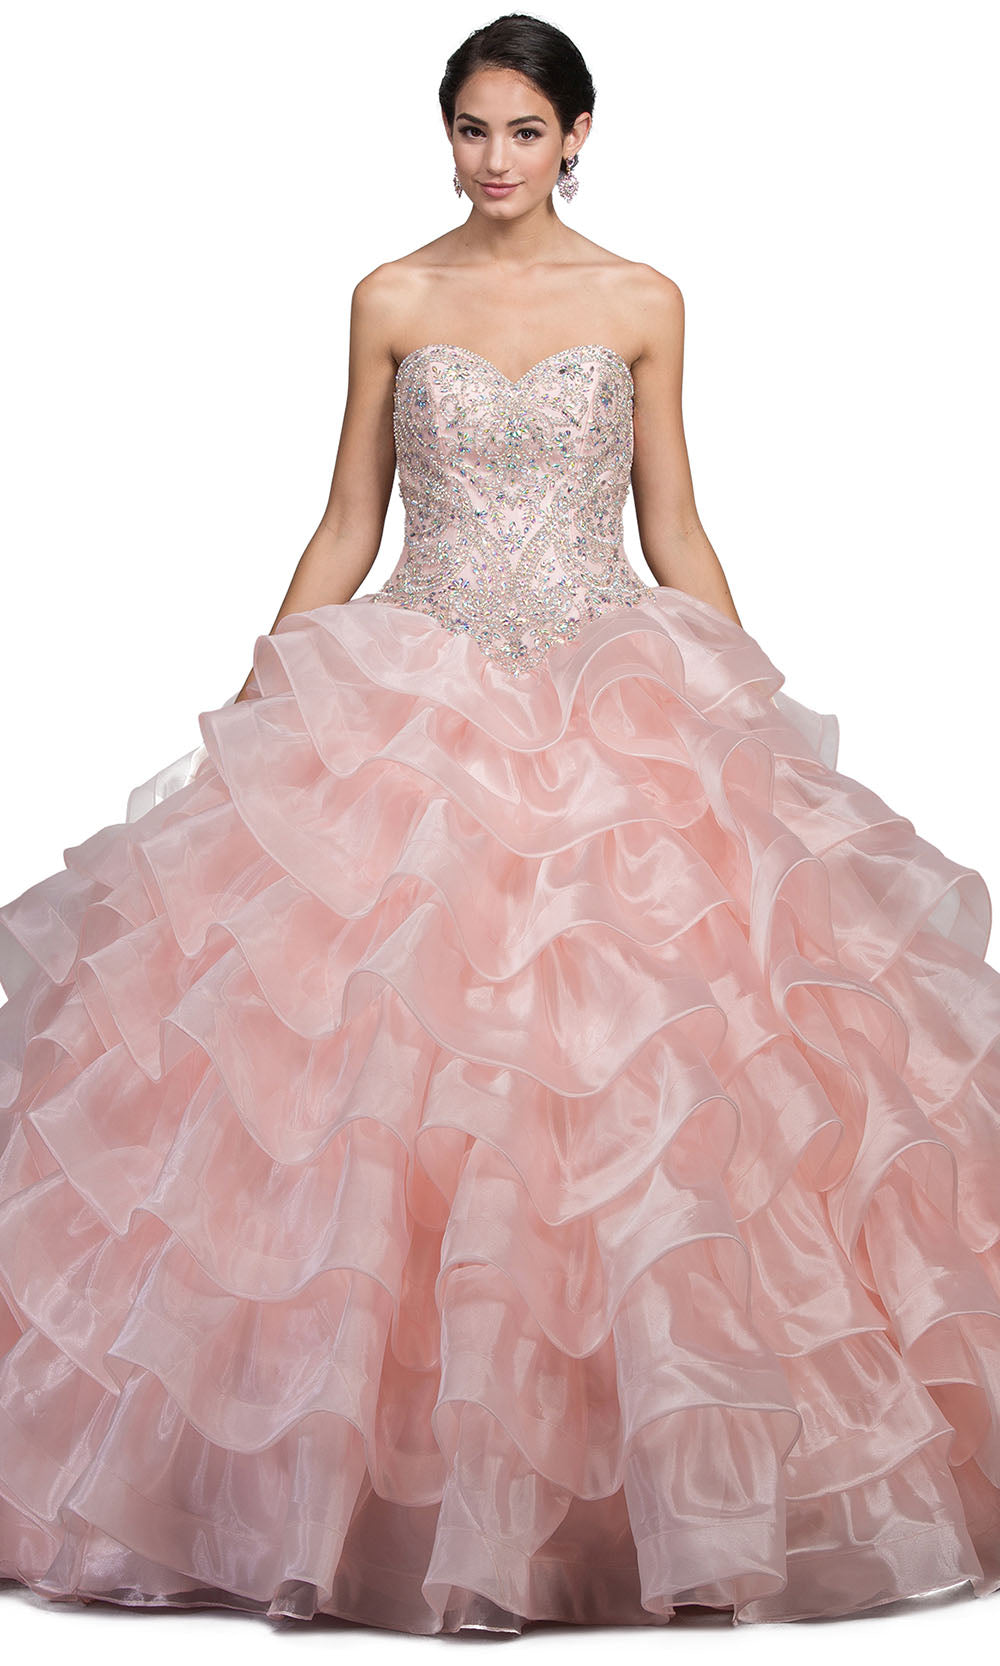 Dancing Queen - 1216 Strapless Bejeweled Tiered Ballgown In Pink